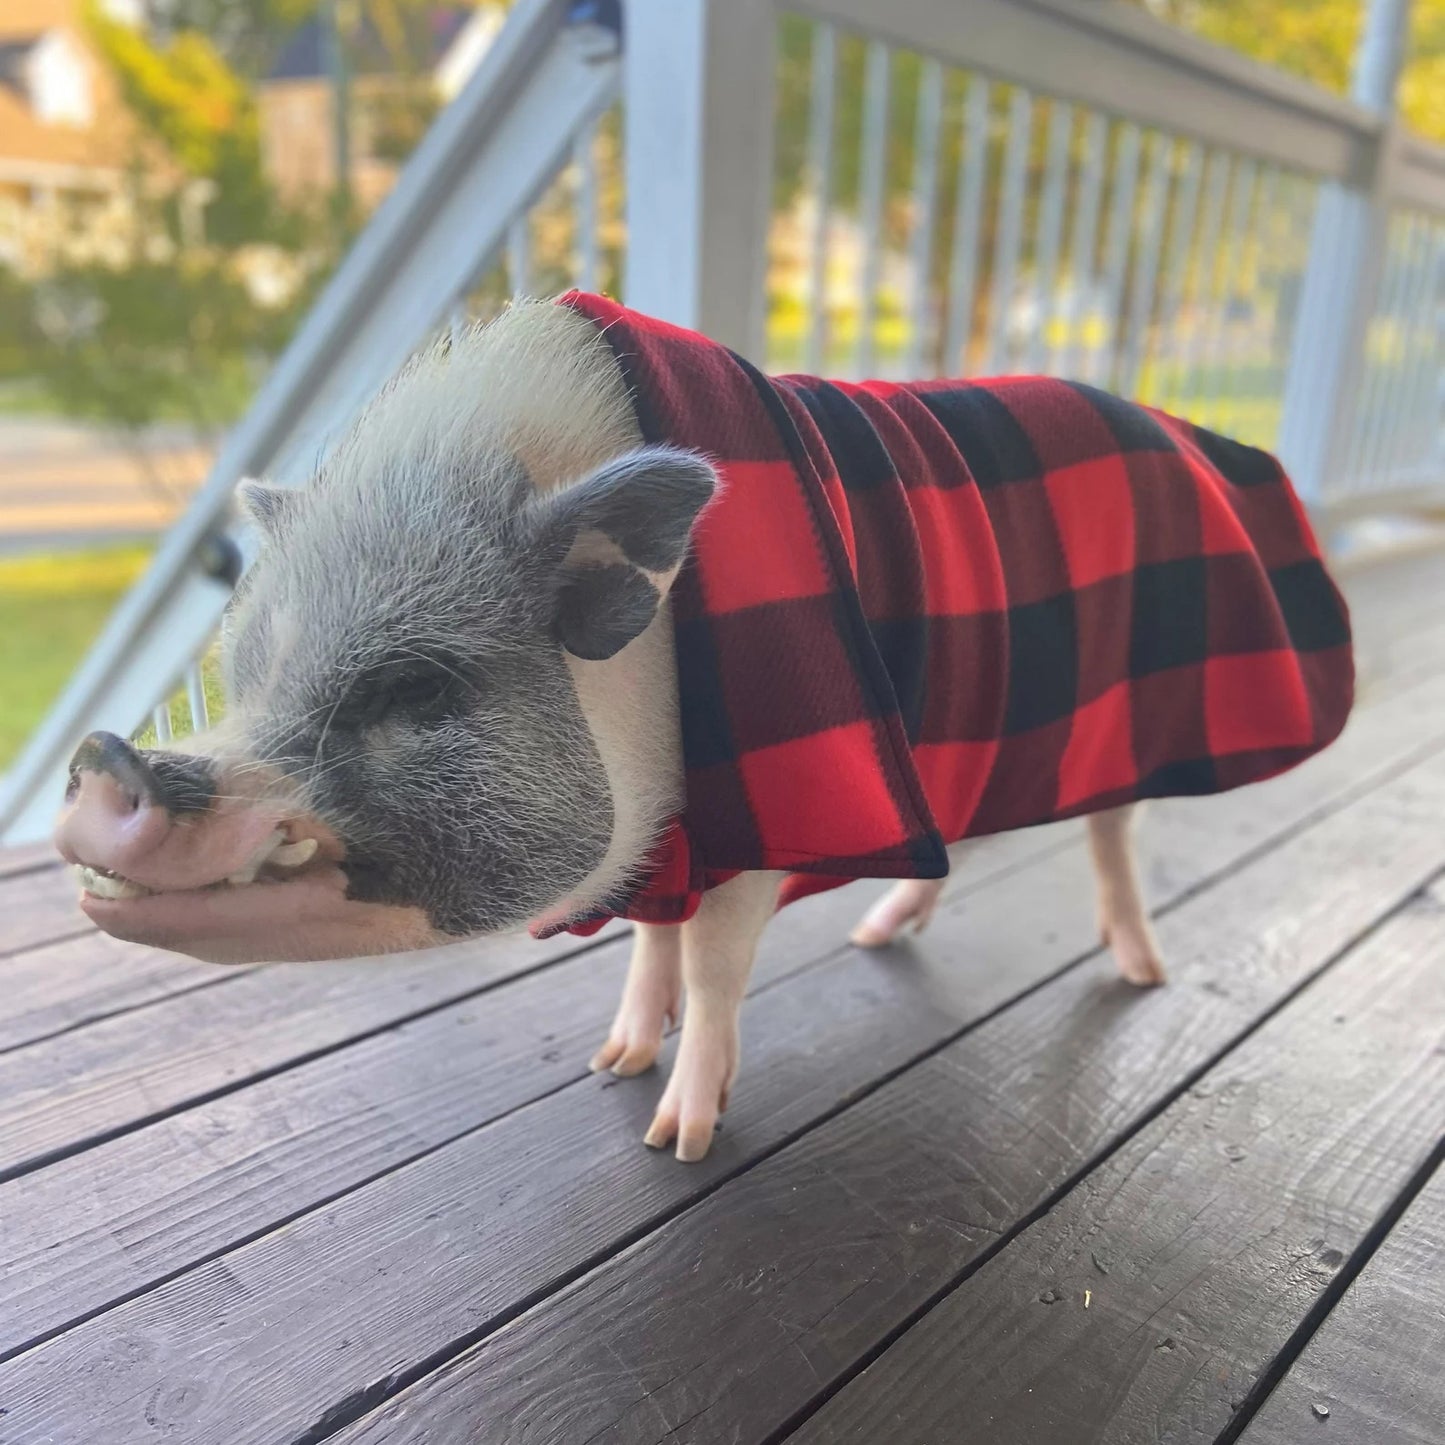 Red Buffalo Plaid Checker Cozy Fleece Pig Sweater, Mini Pig Coat, Warm Plush Jacket, Pet Clothing for Potbelly Pigs, Hogs, & Boar Clothes